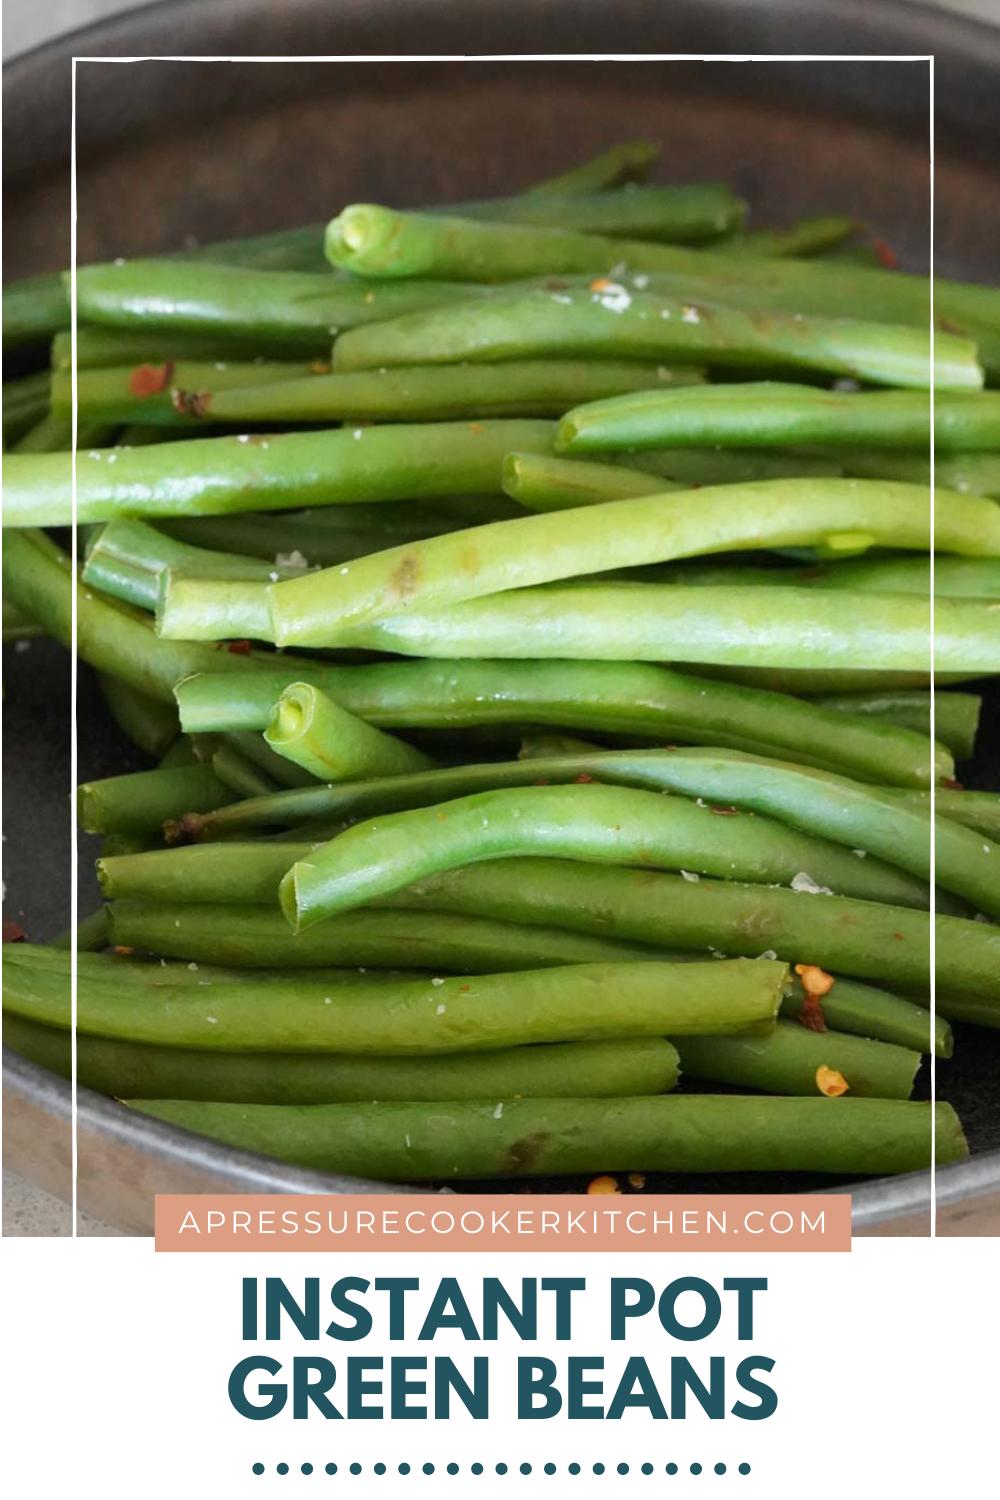 A plate of green beans